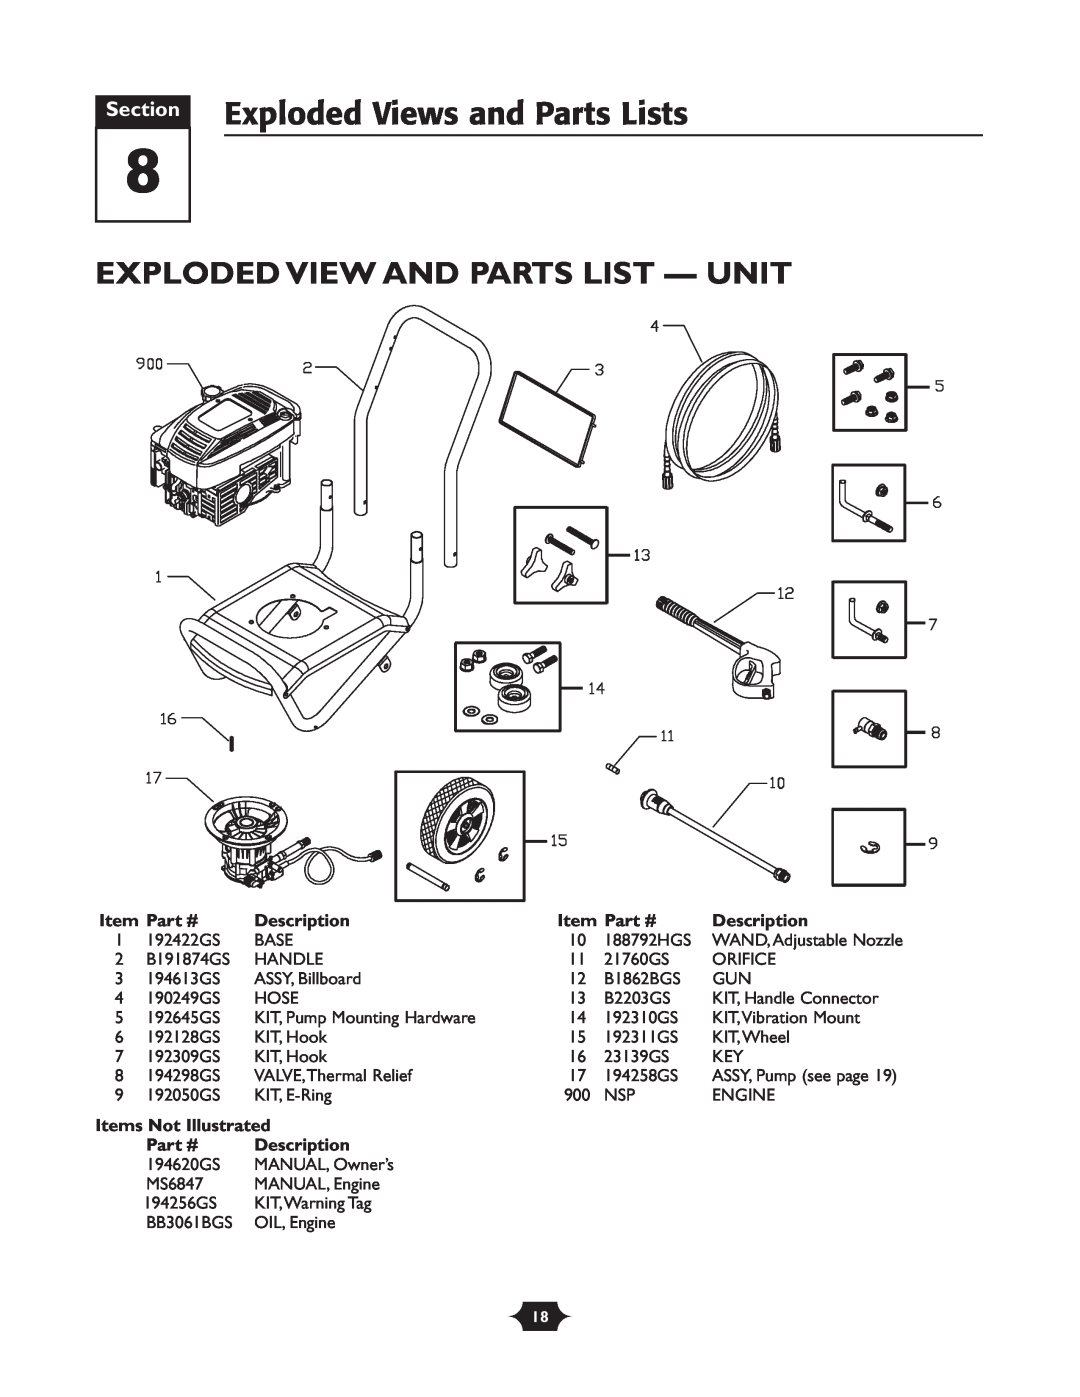 Troy-Bilt 20207 manual Section Exploded Views and Parts Lists, Exploded View And Parts List - Unit, Description 